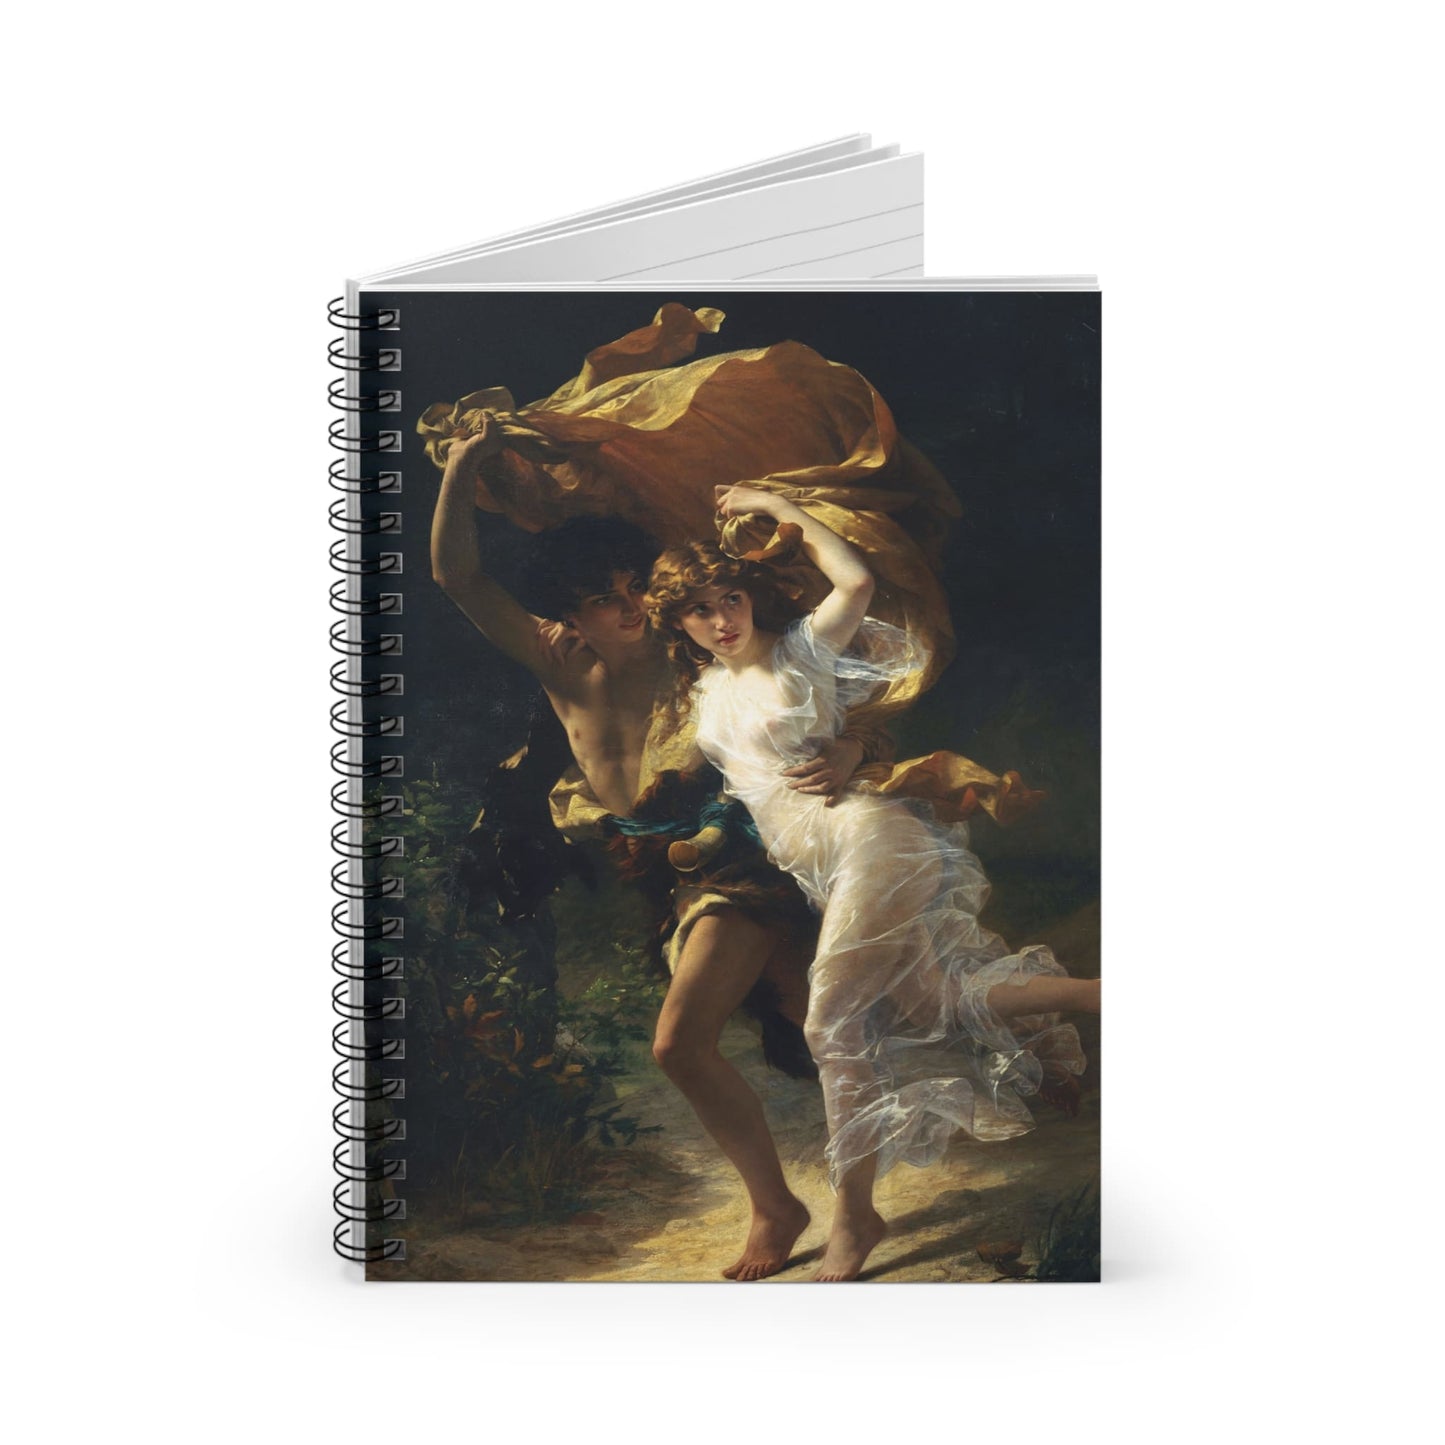 Victorian Lovers Spiral Notebook Standing up on White Desk